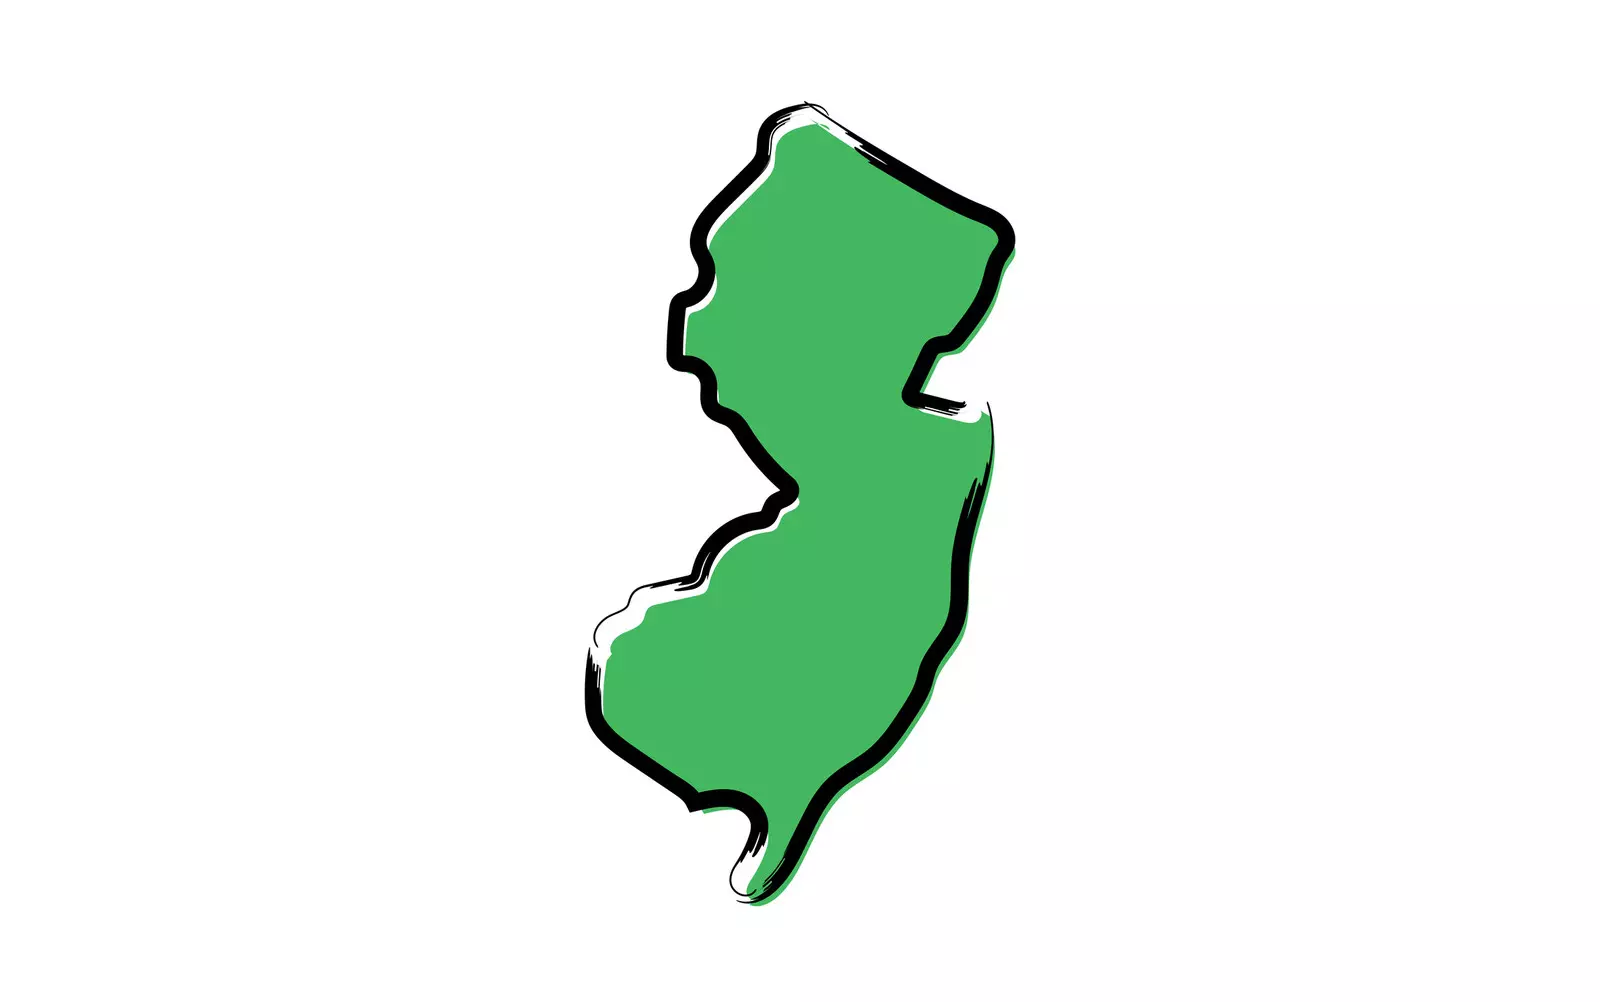 10 Facts About New Jersey That You Might Not Know